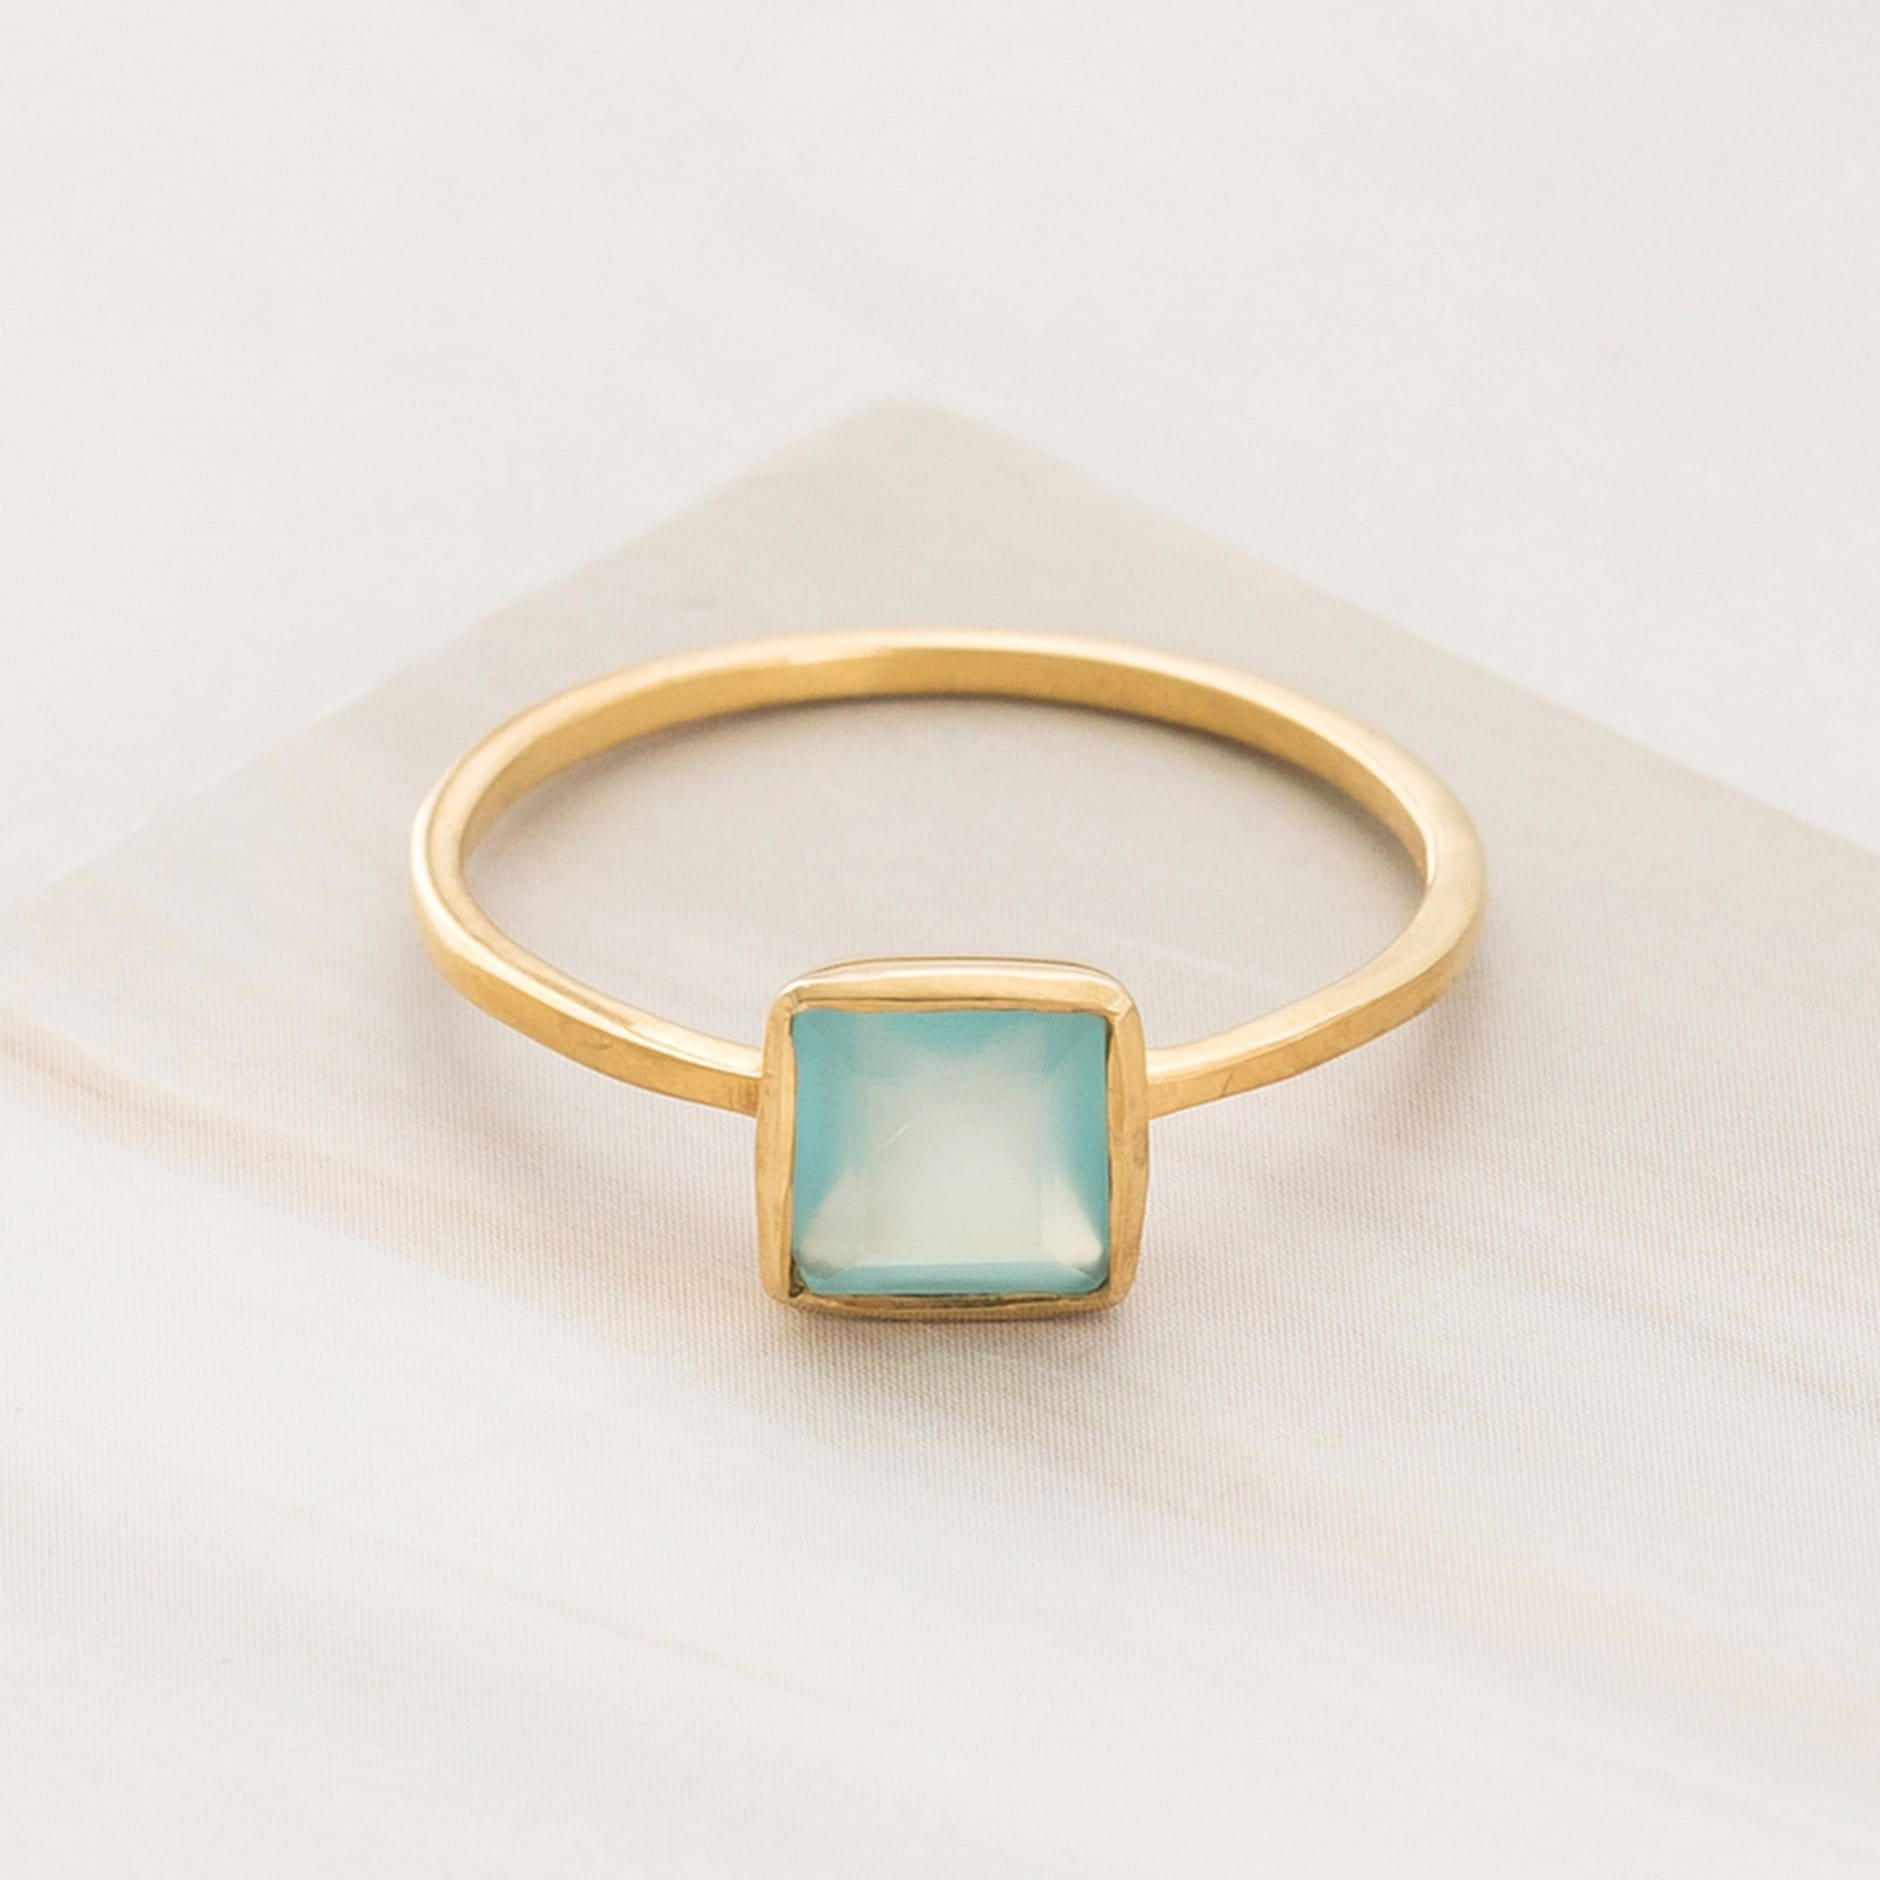 Emblem Jewelry Rings Chalcedony / Square Signature Candy Gemstone Stack Rings (Ring Size 7)